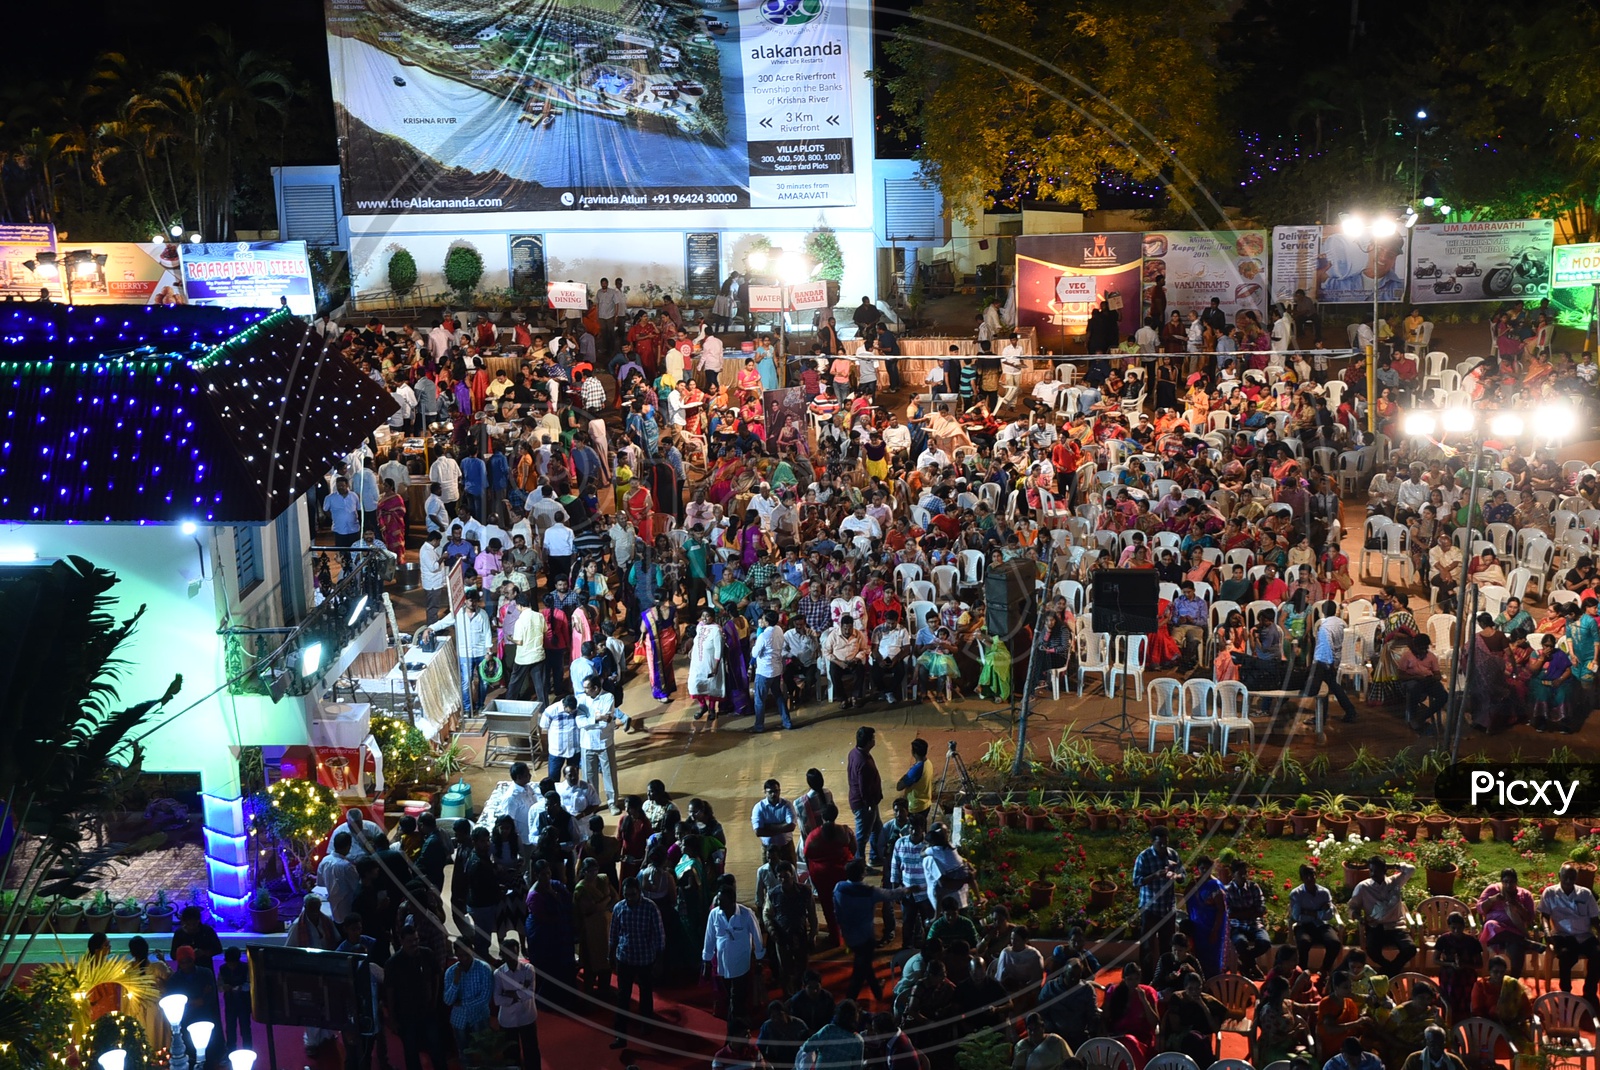 Aerial View of a Party Gathering